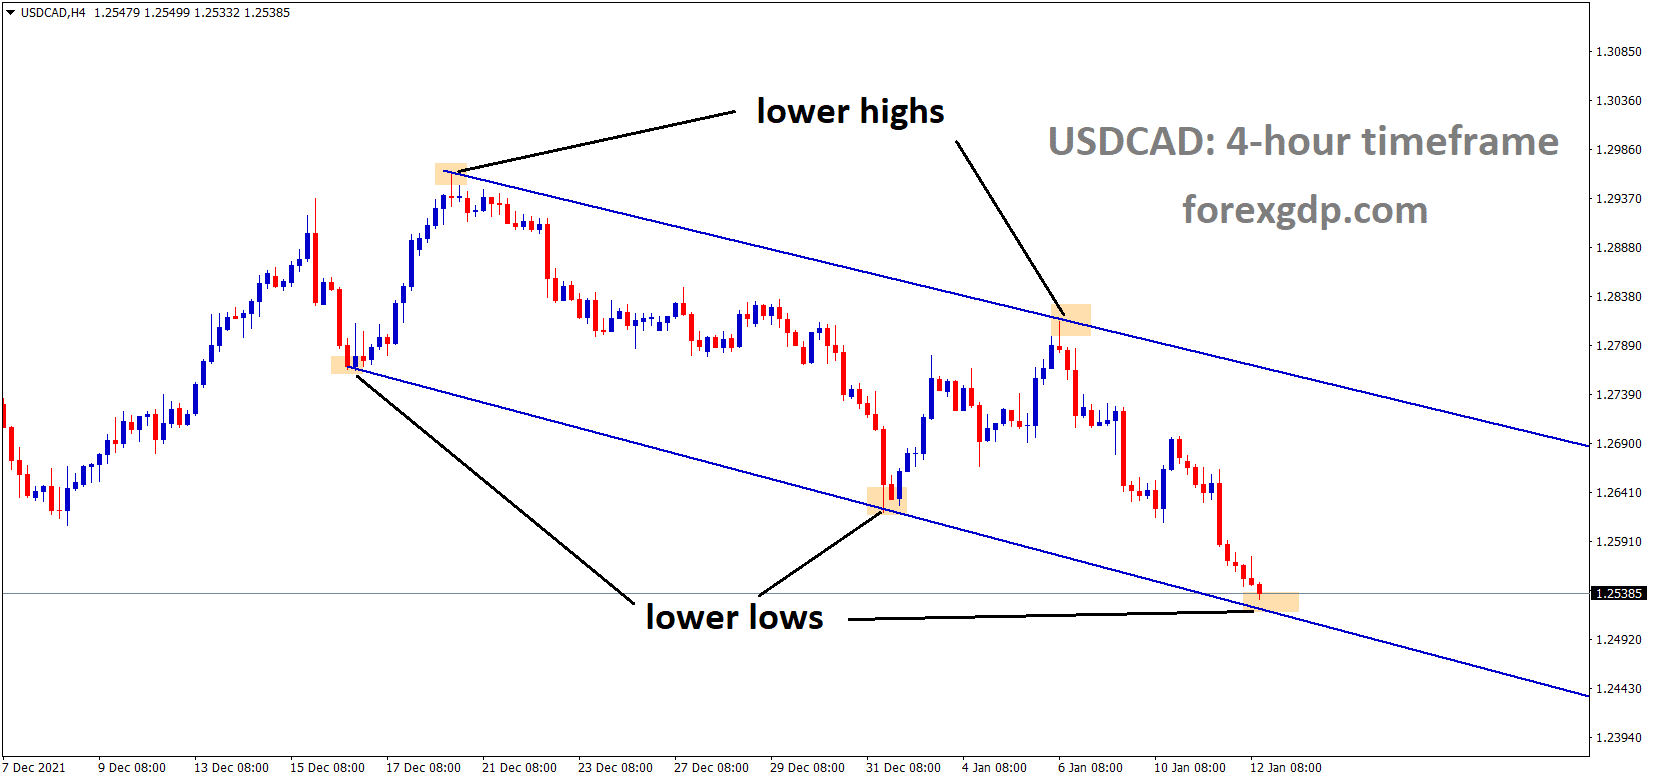 USDCAD is moving in the Descending channel and the market has reached the lower low area of the channel 1